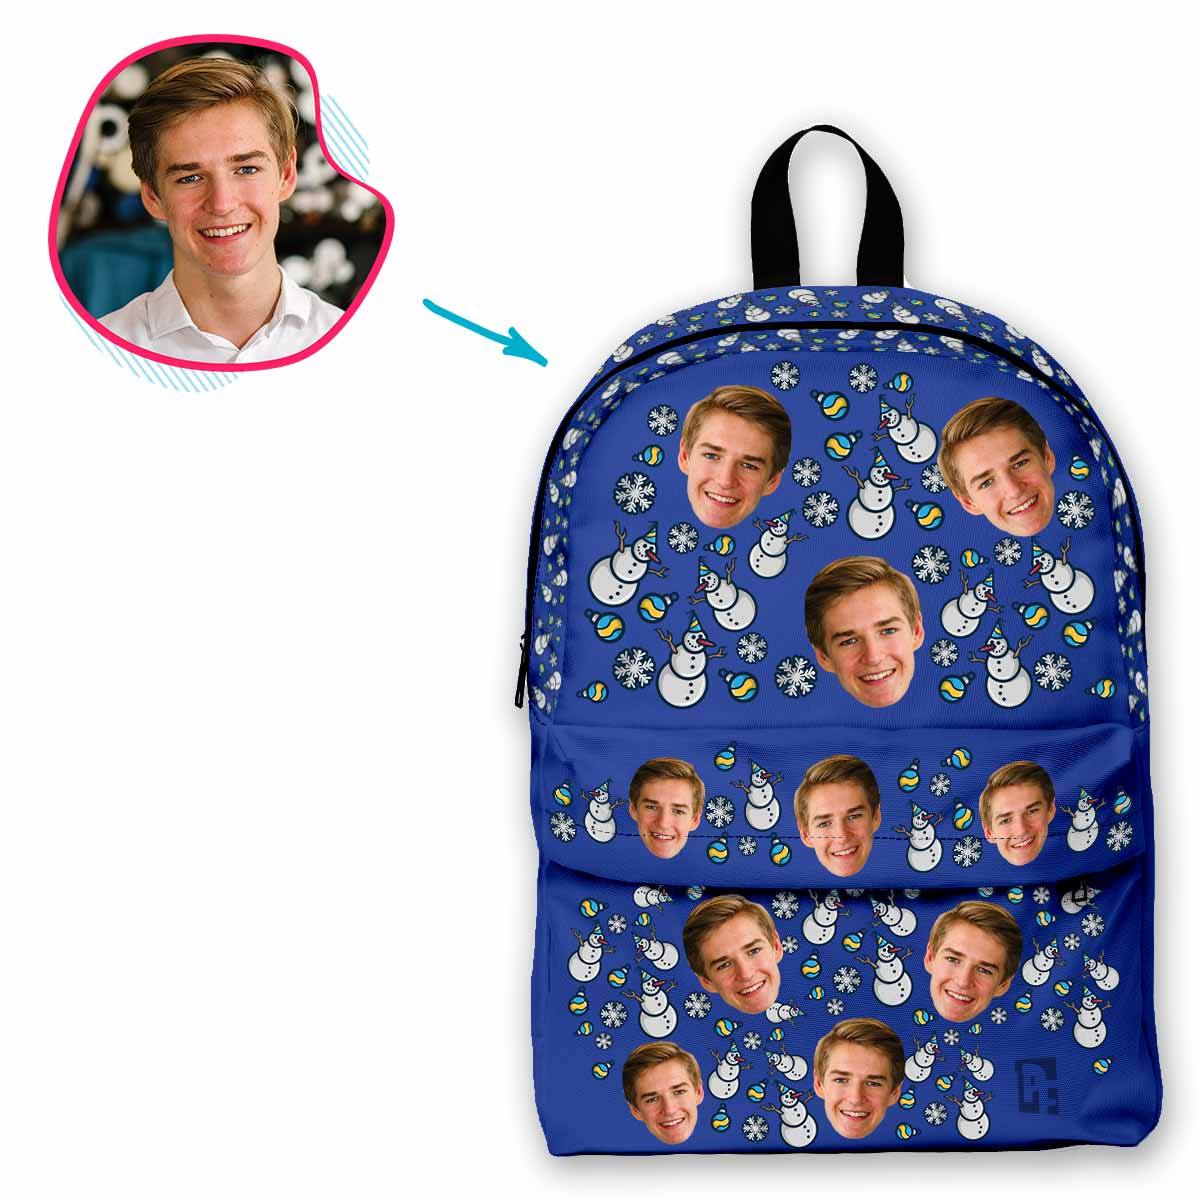 darkblue Snowman classic backpack personalized with photo of face printed on it